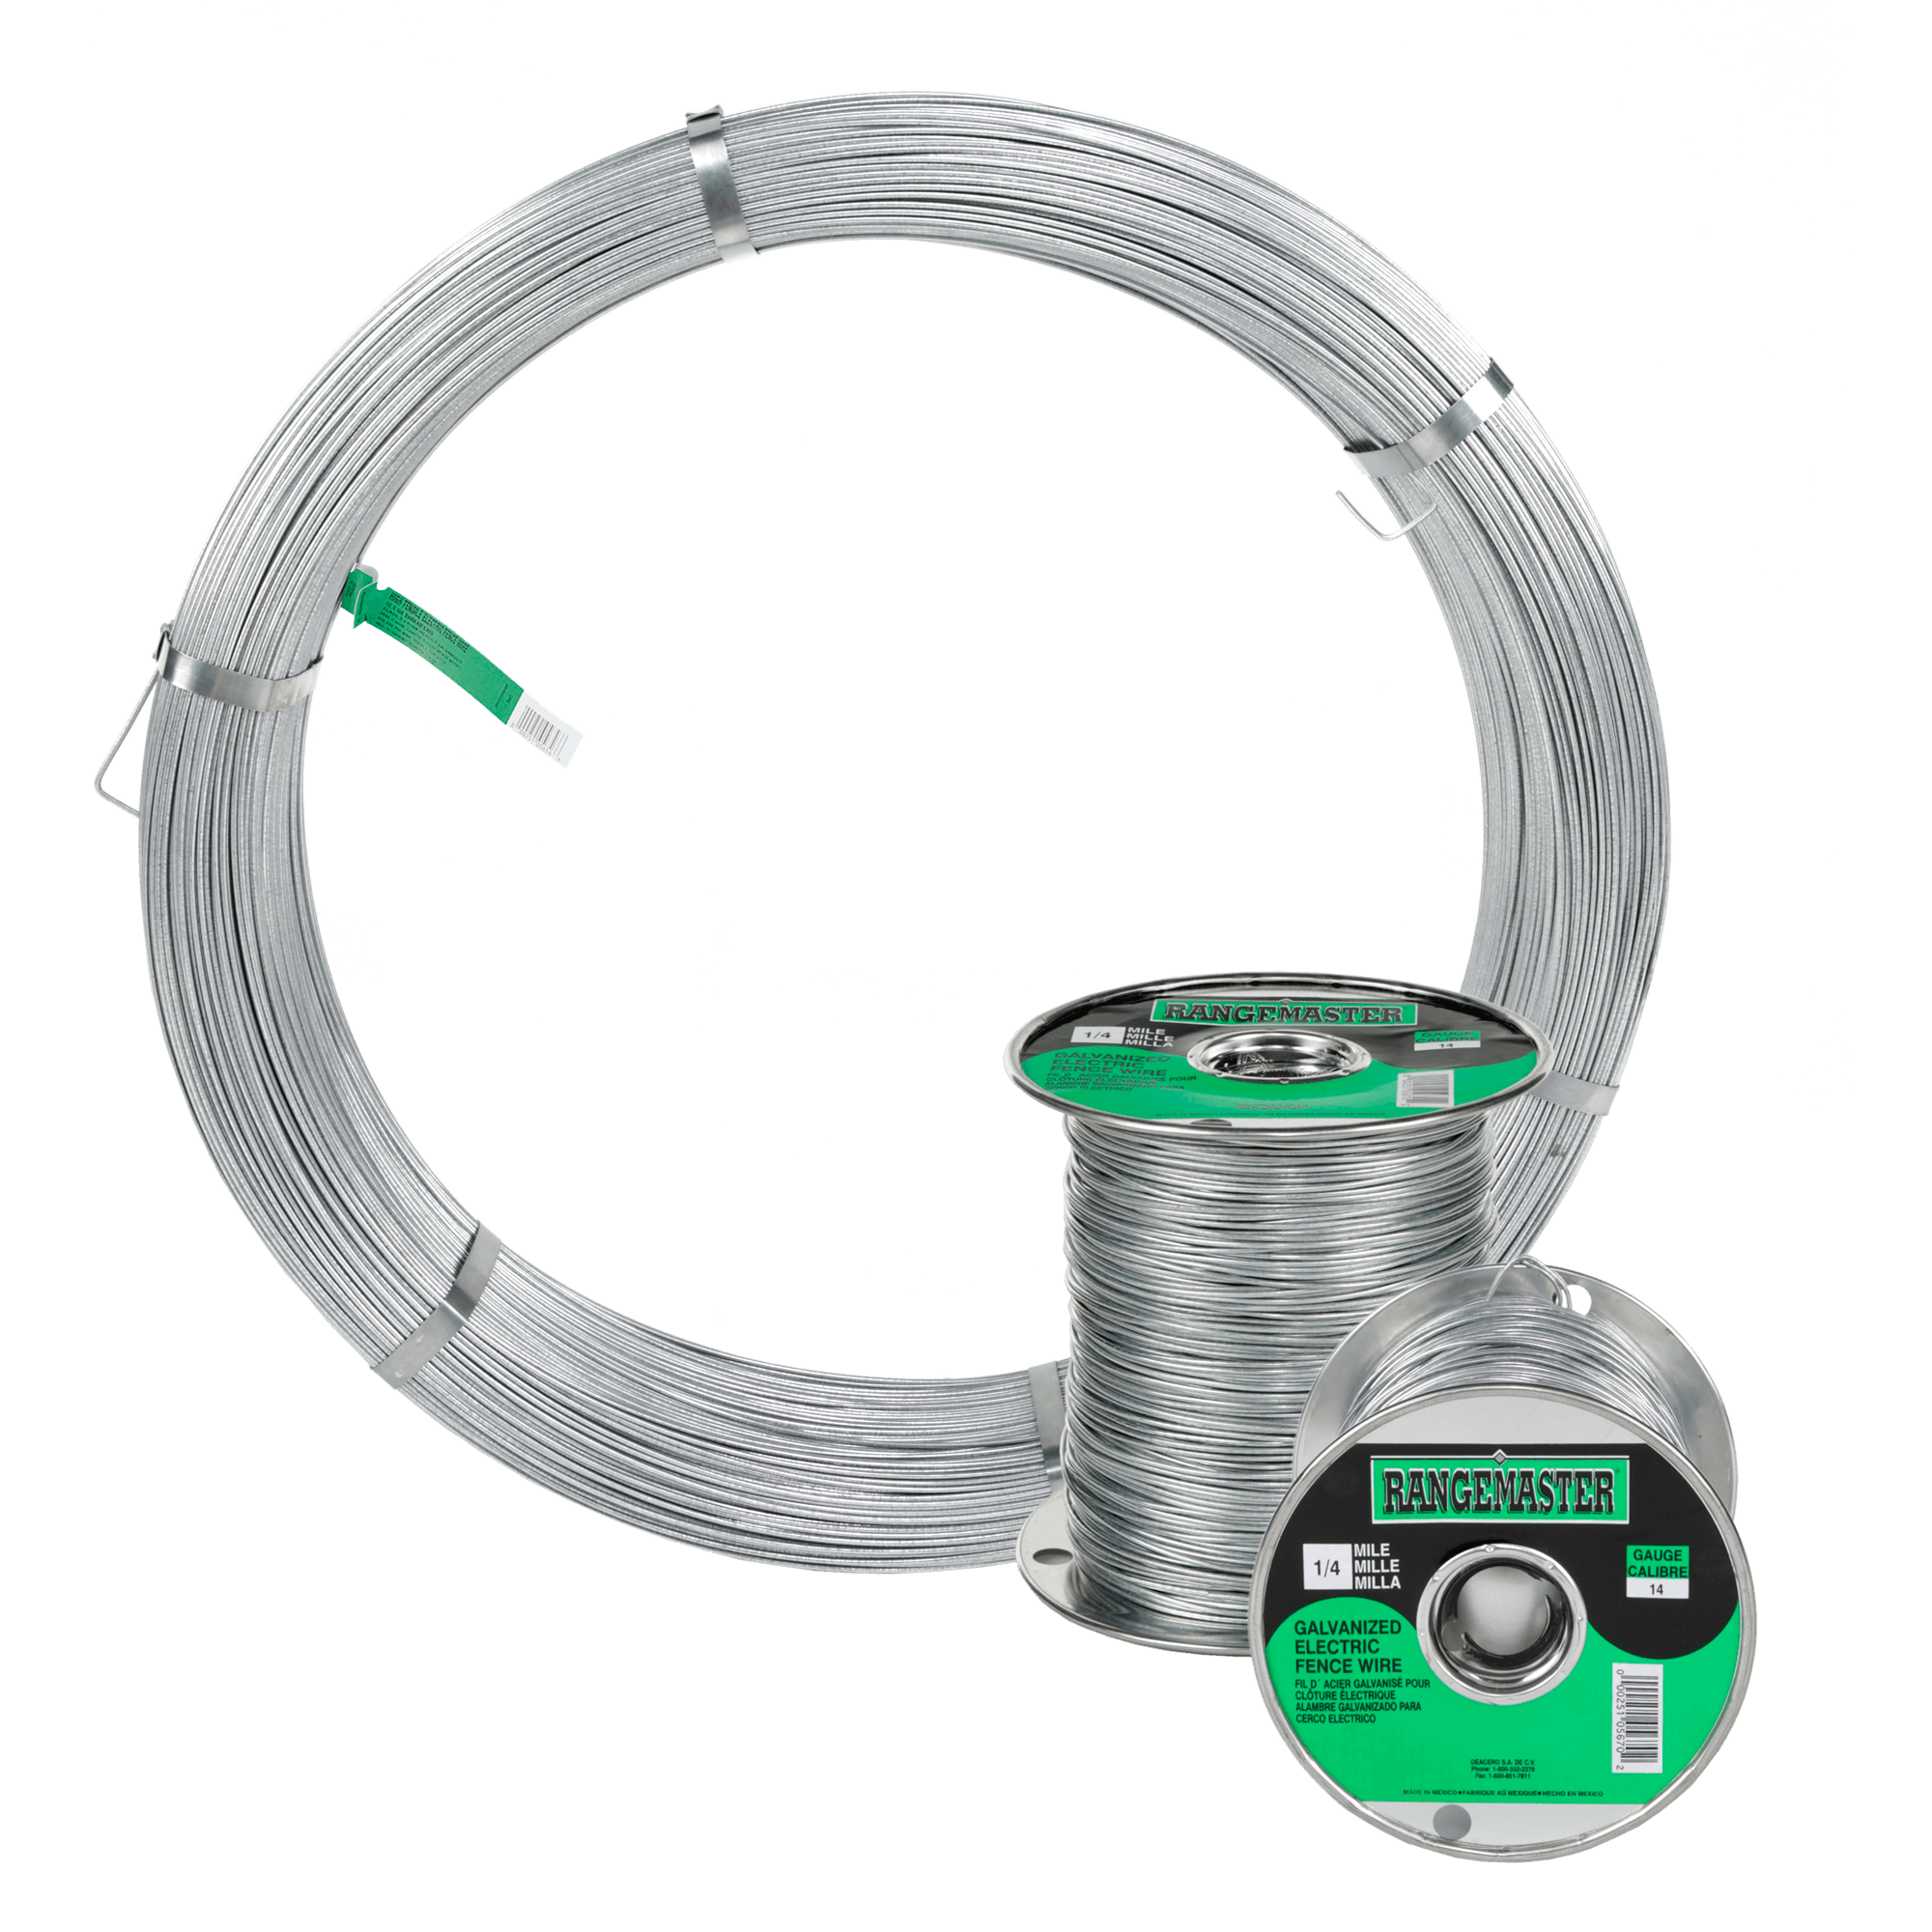 01-rangemaster-electric-fence-wire-coil-and-spools